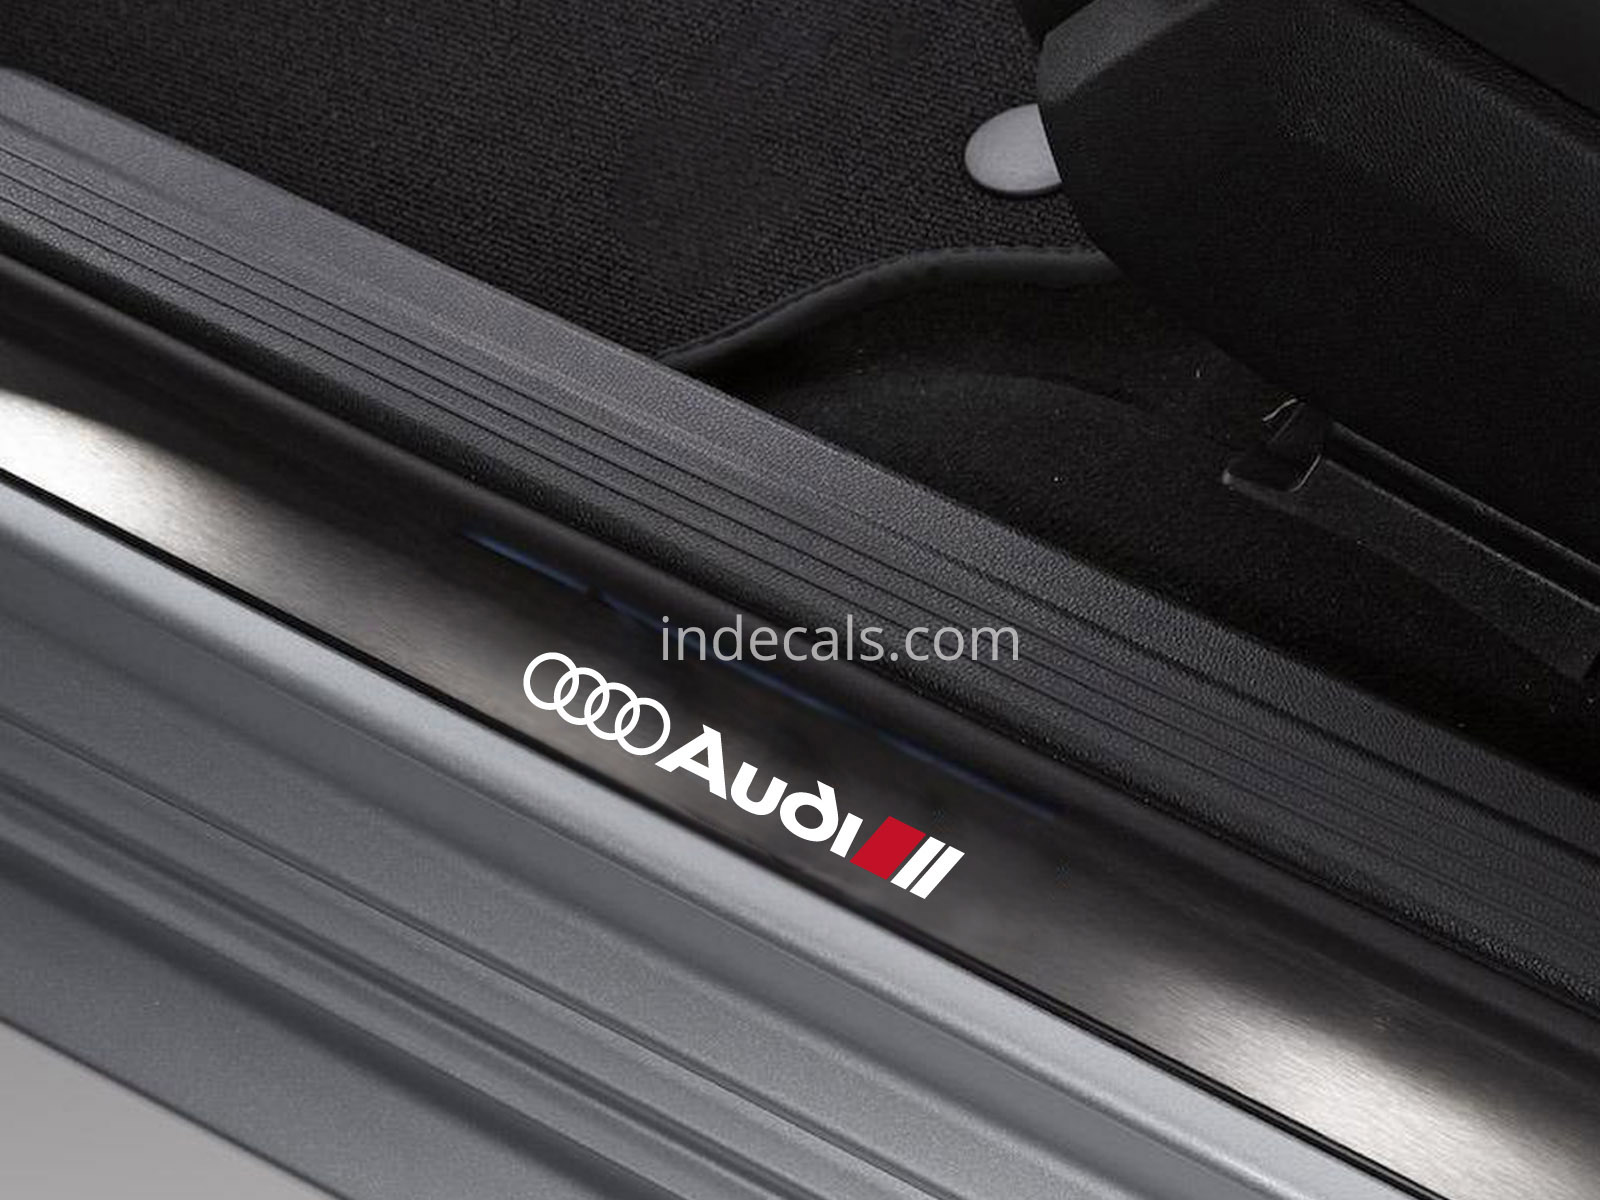 6 x Audi Stickers for Door Sills - White